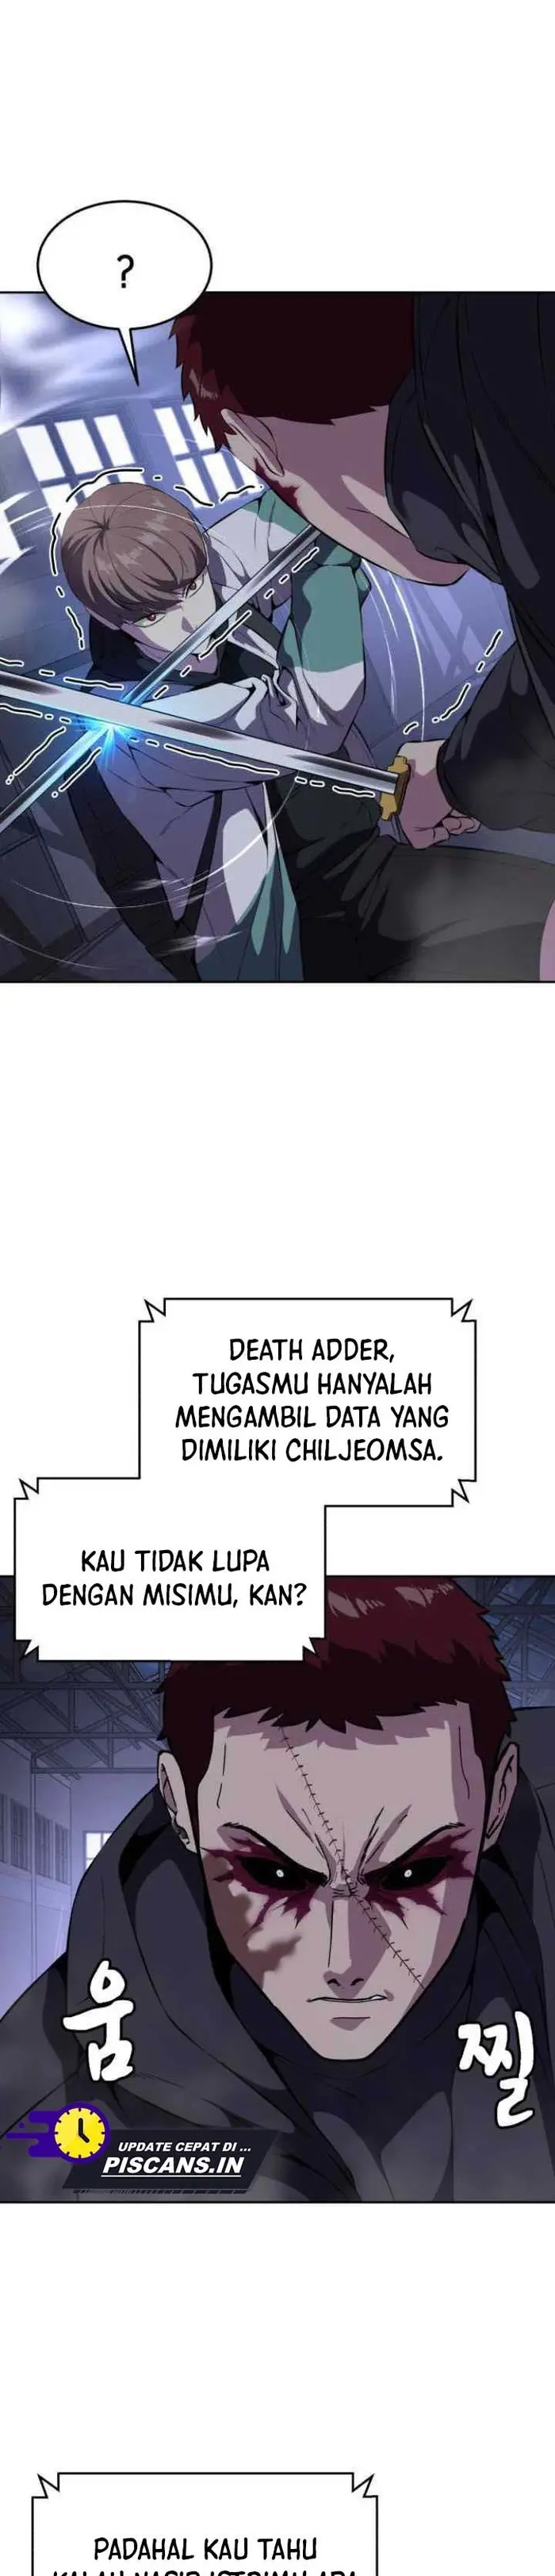 The Boy Of Death Chapter 155 - 369